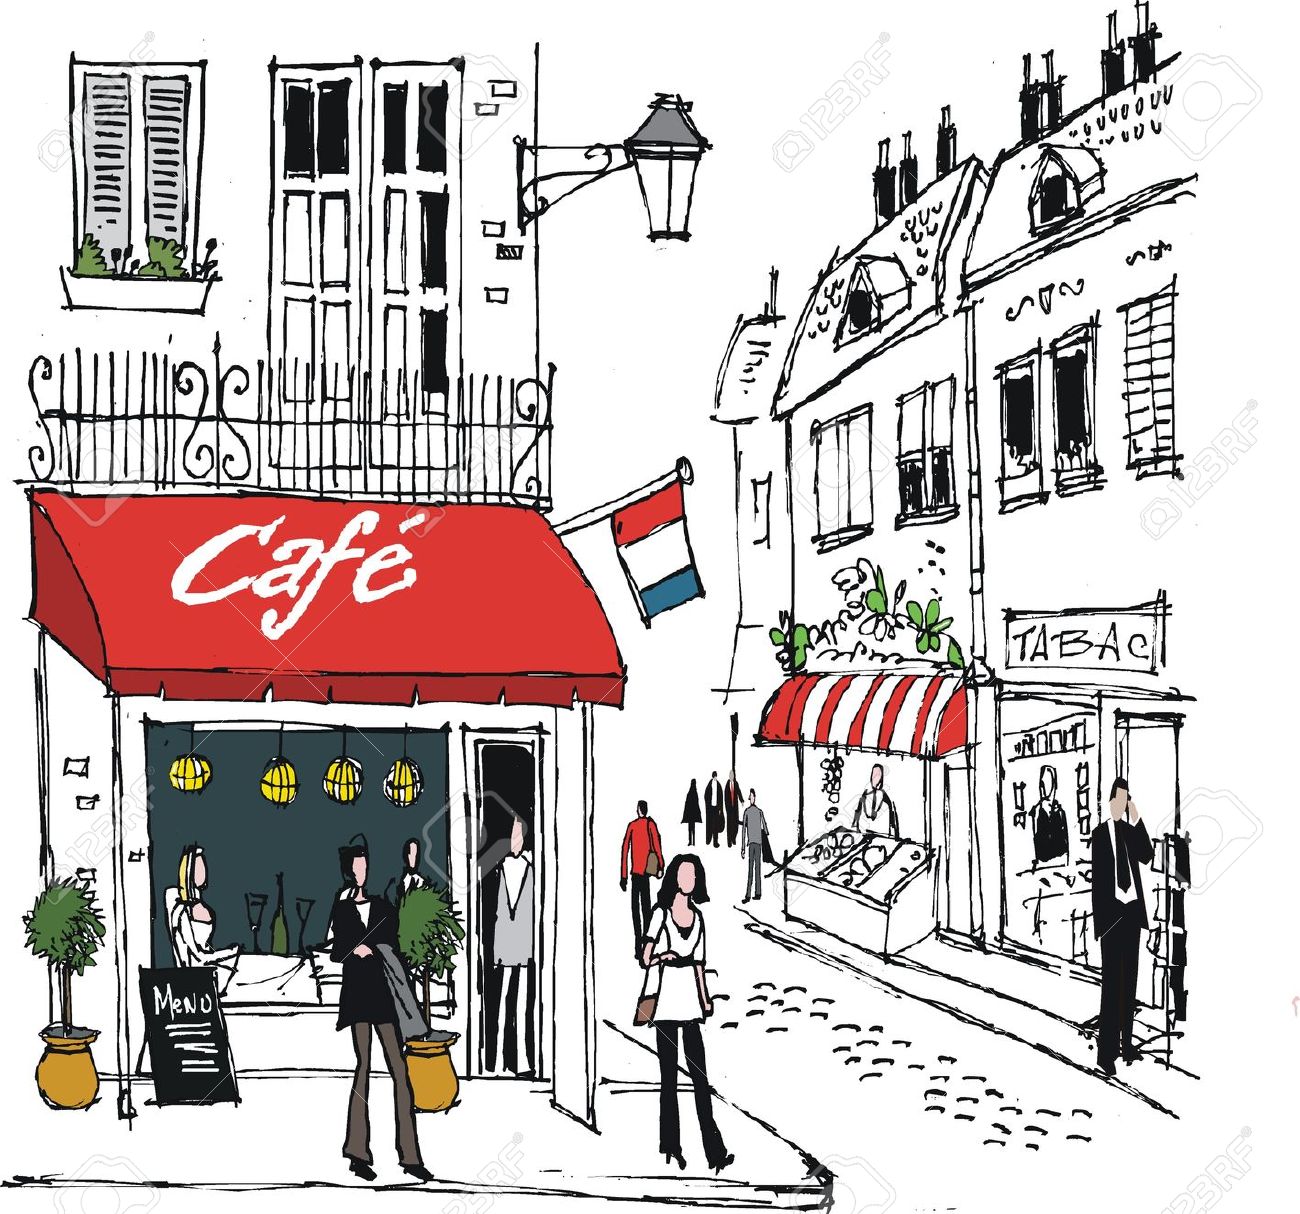 clipart of cafe - photo #15